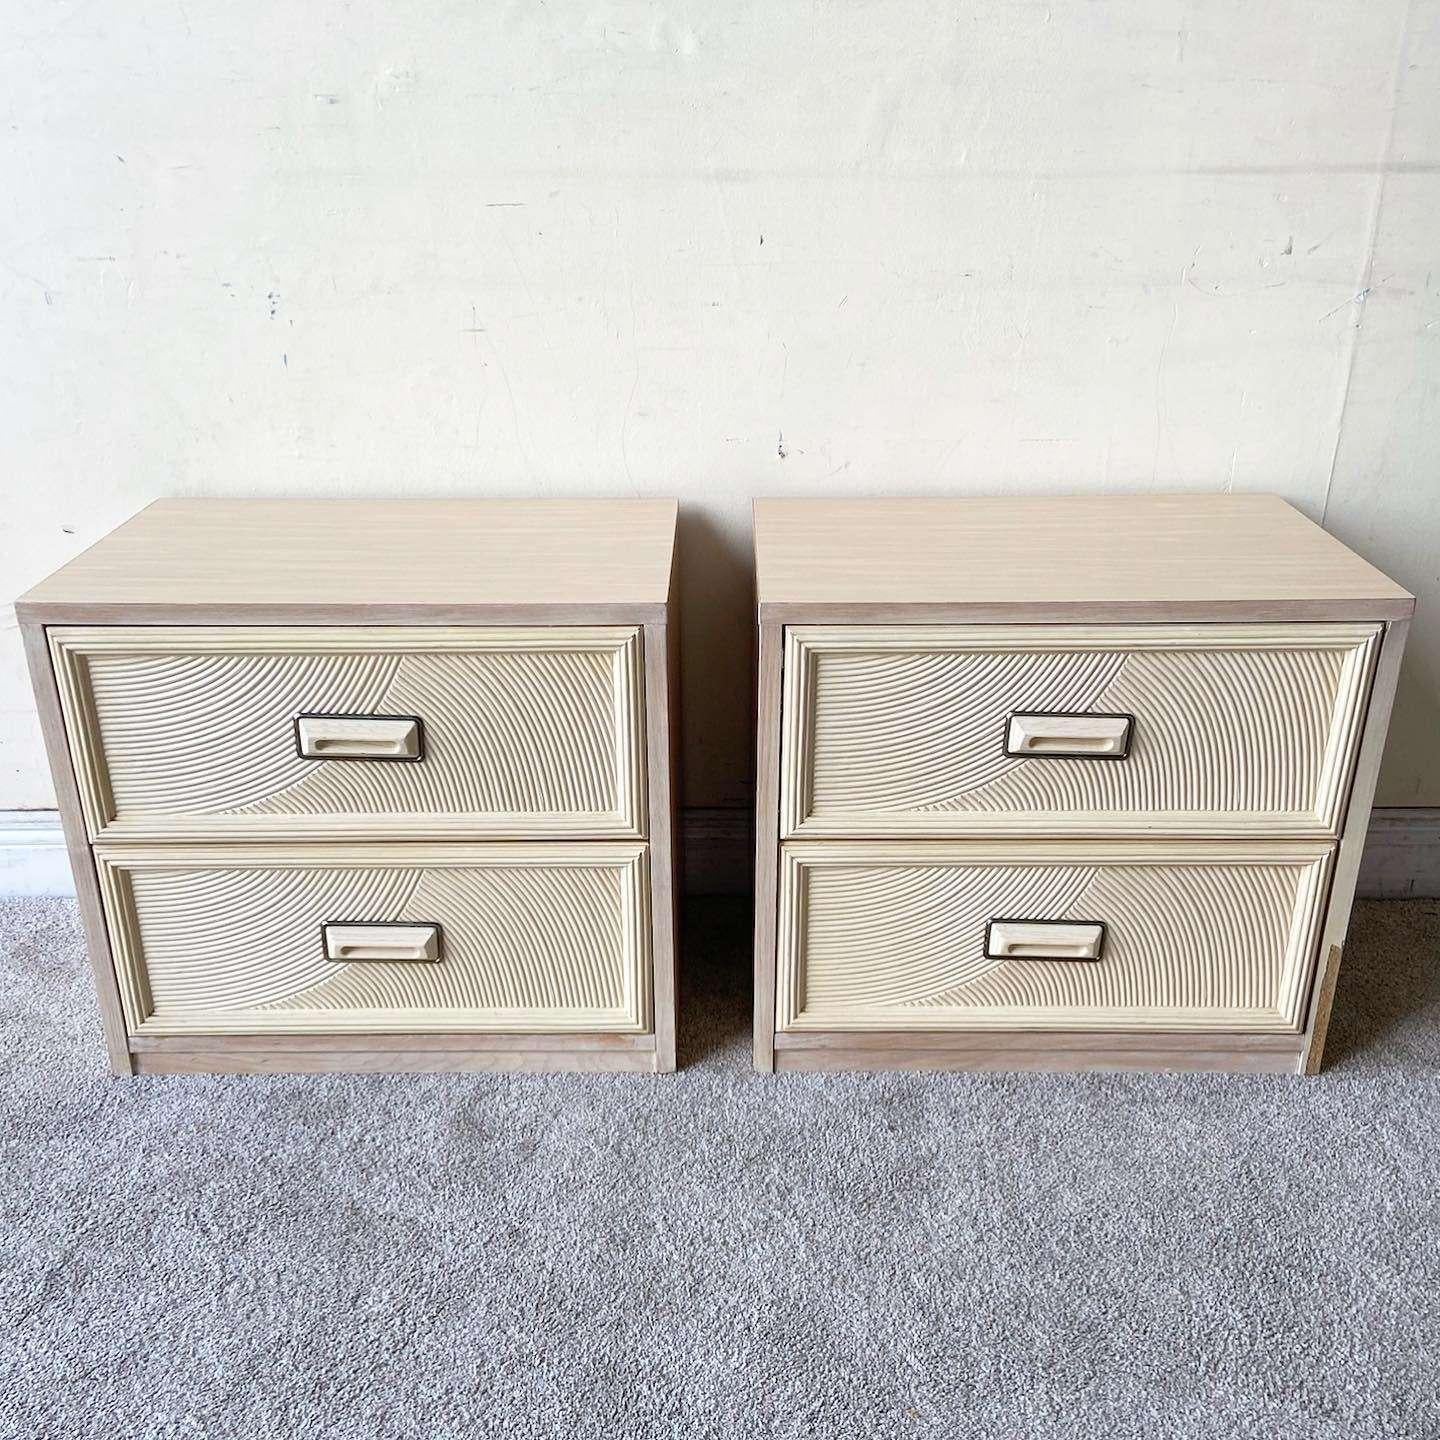 Late 20th Century Postmodern Lexington Pencil Reed Nightstands by Henry Link - a Pair For Sale